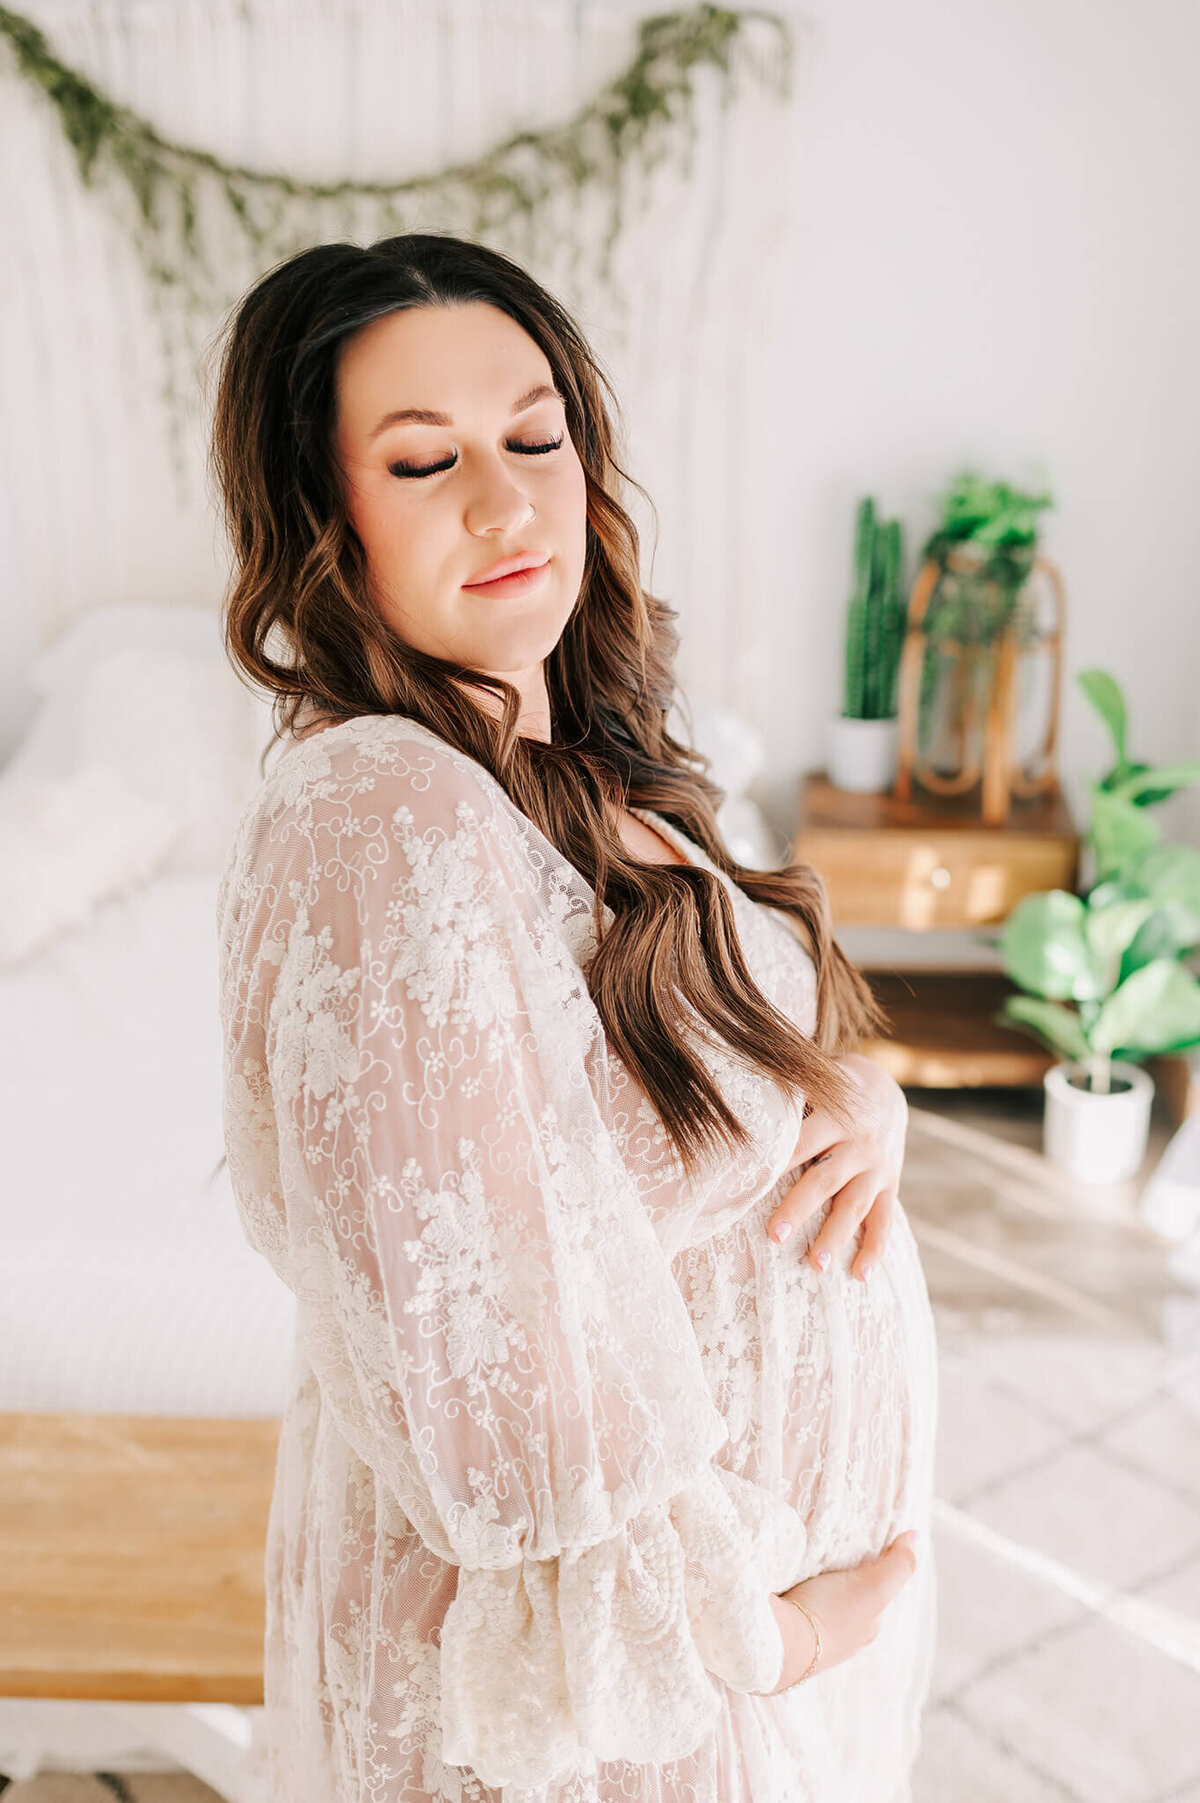 Springfield MO maternity photographer Jessica Kennedy of The XO Photography captures pregnant mom closing eyes and holding bump in lace dress